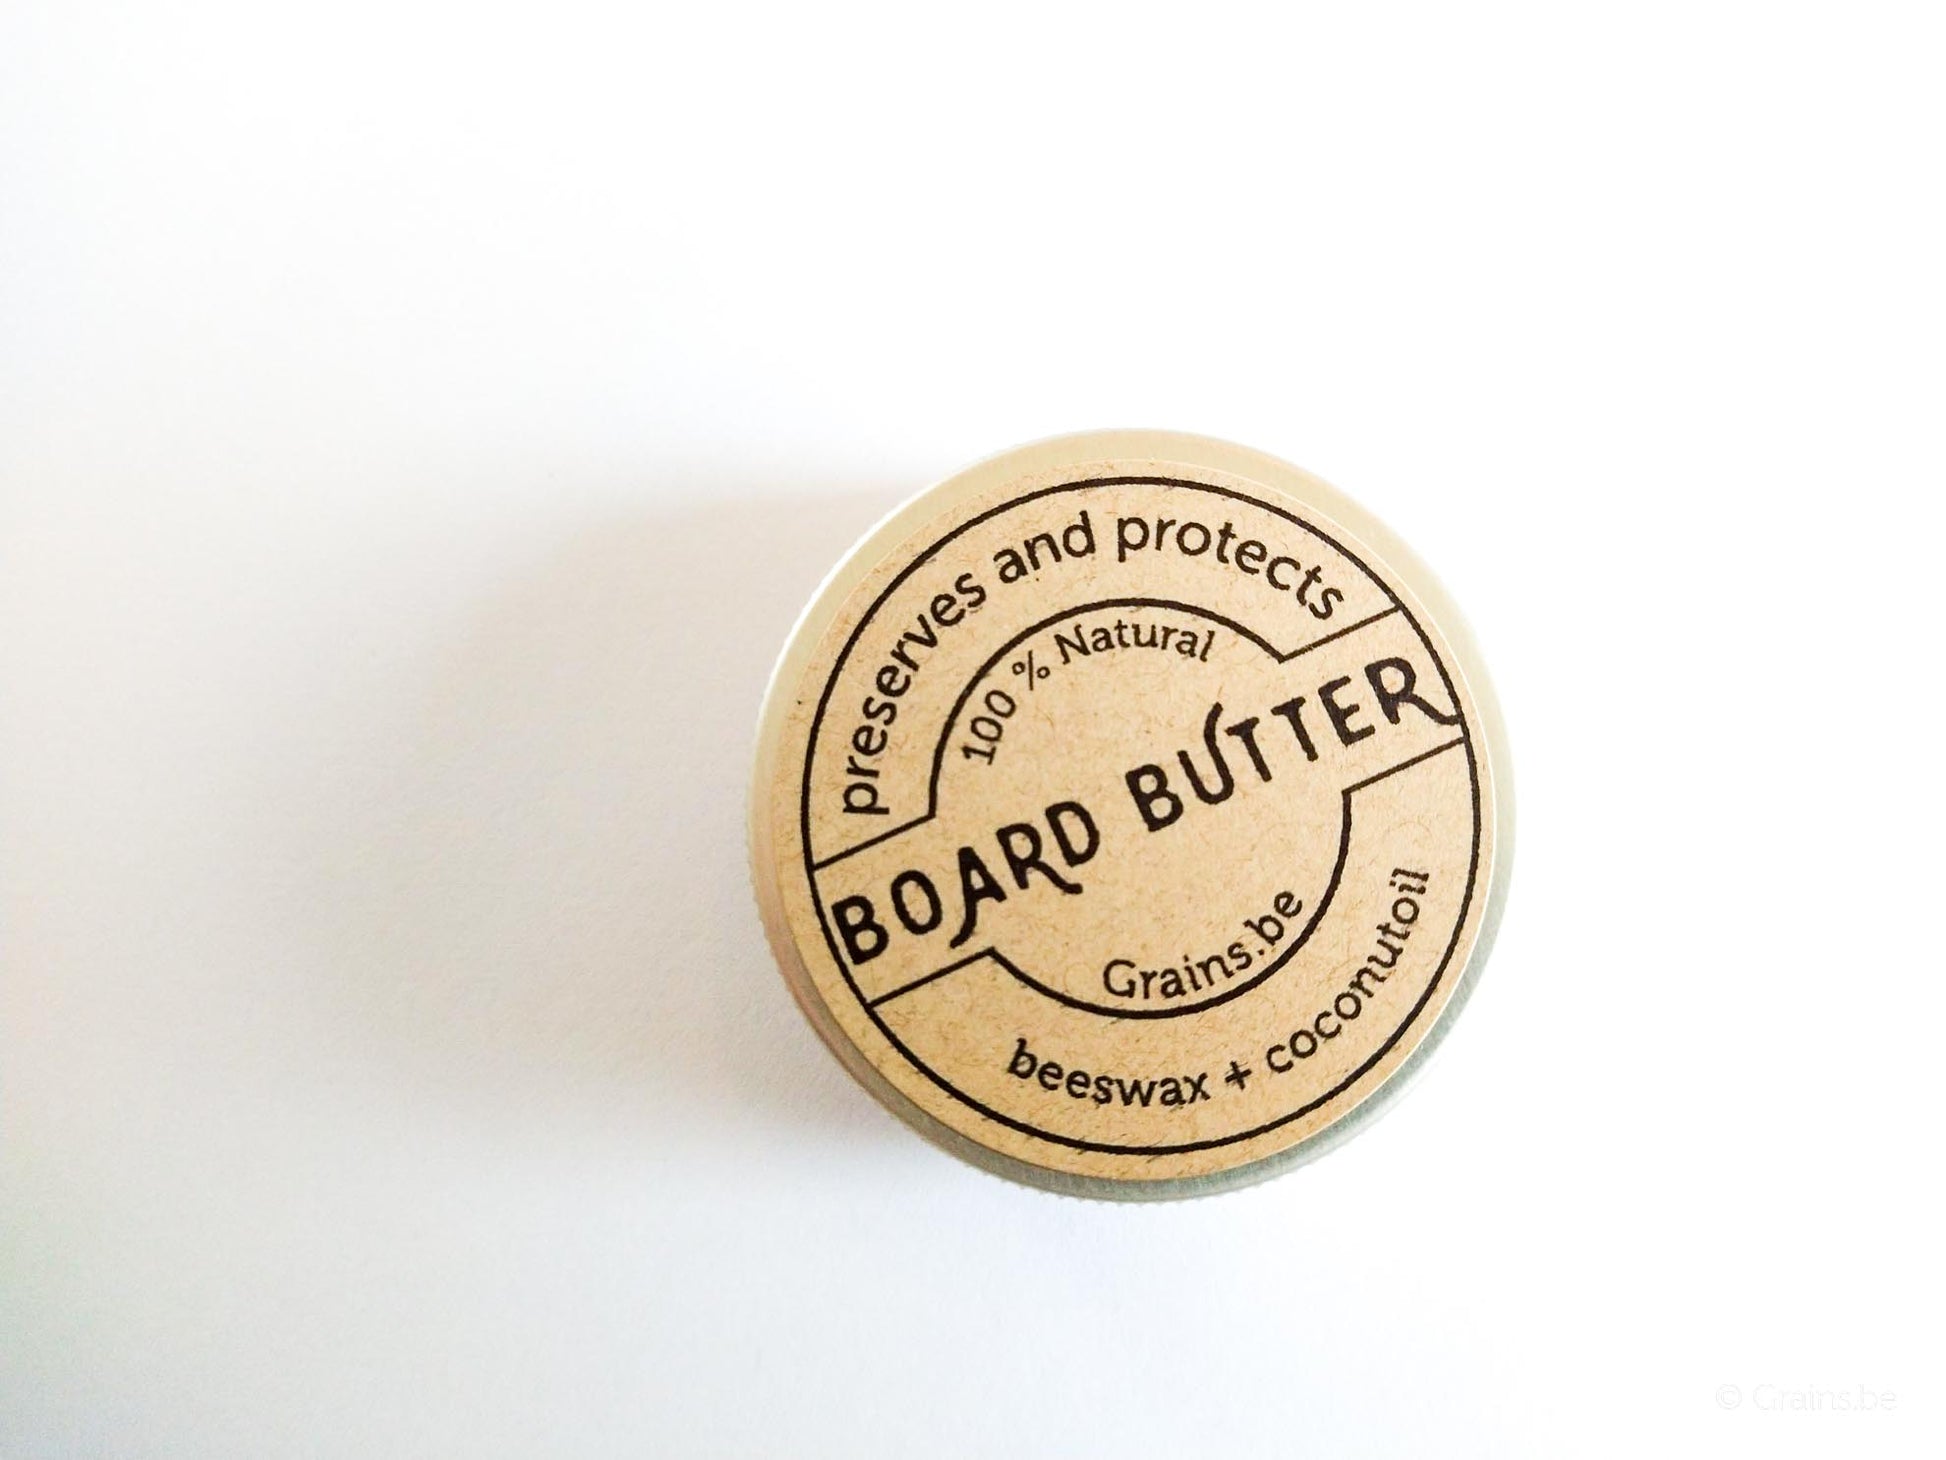 100% natural Boardbutter made with beeswax and coconutoil. 20ml screw cap